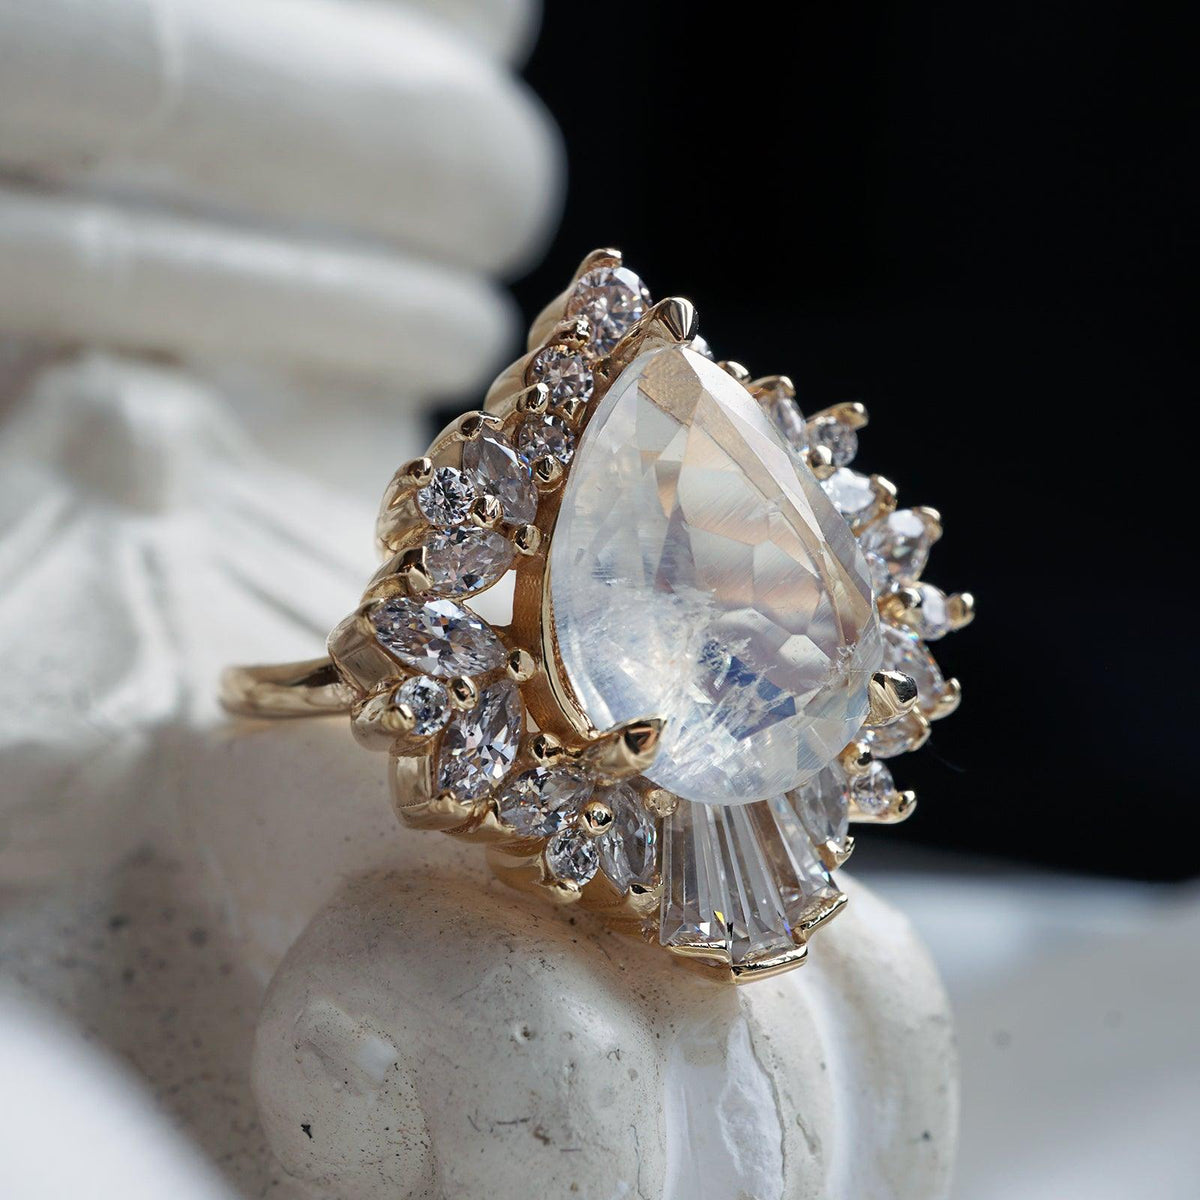 Hall Of Mirrors Moonstone Diamond Ring in 14K and 18K Gold